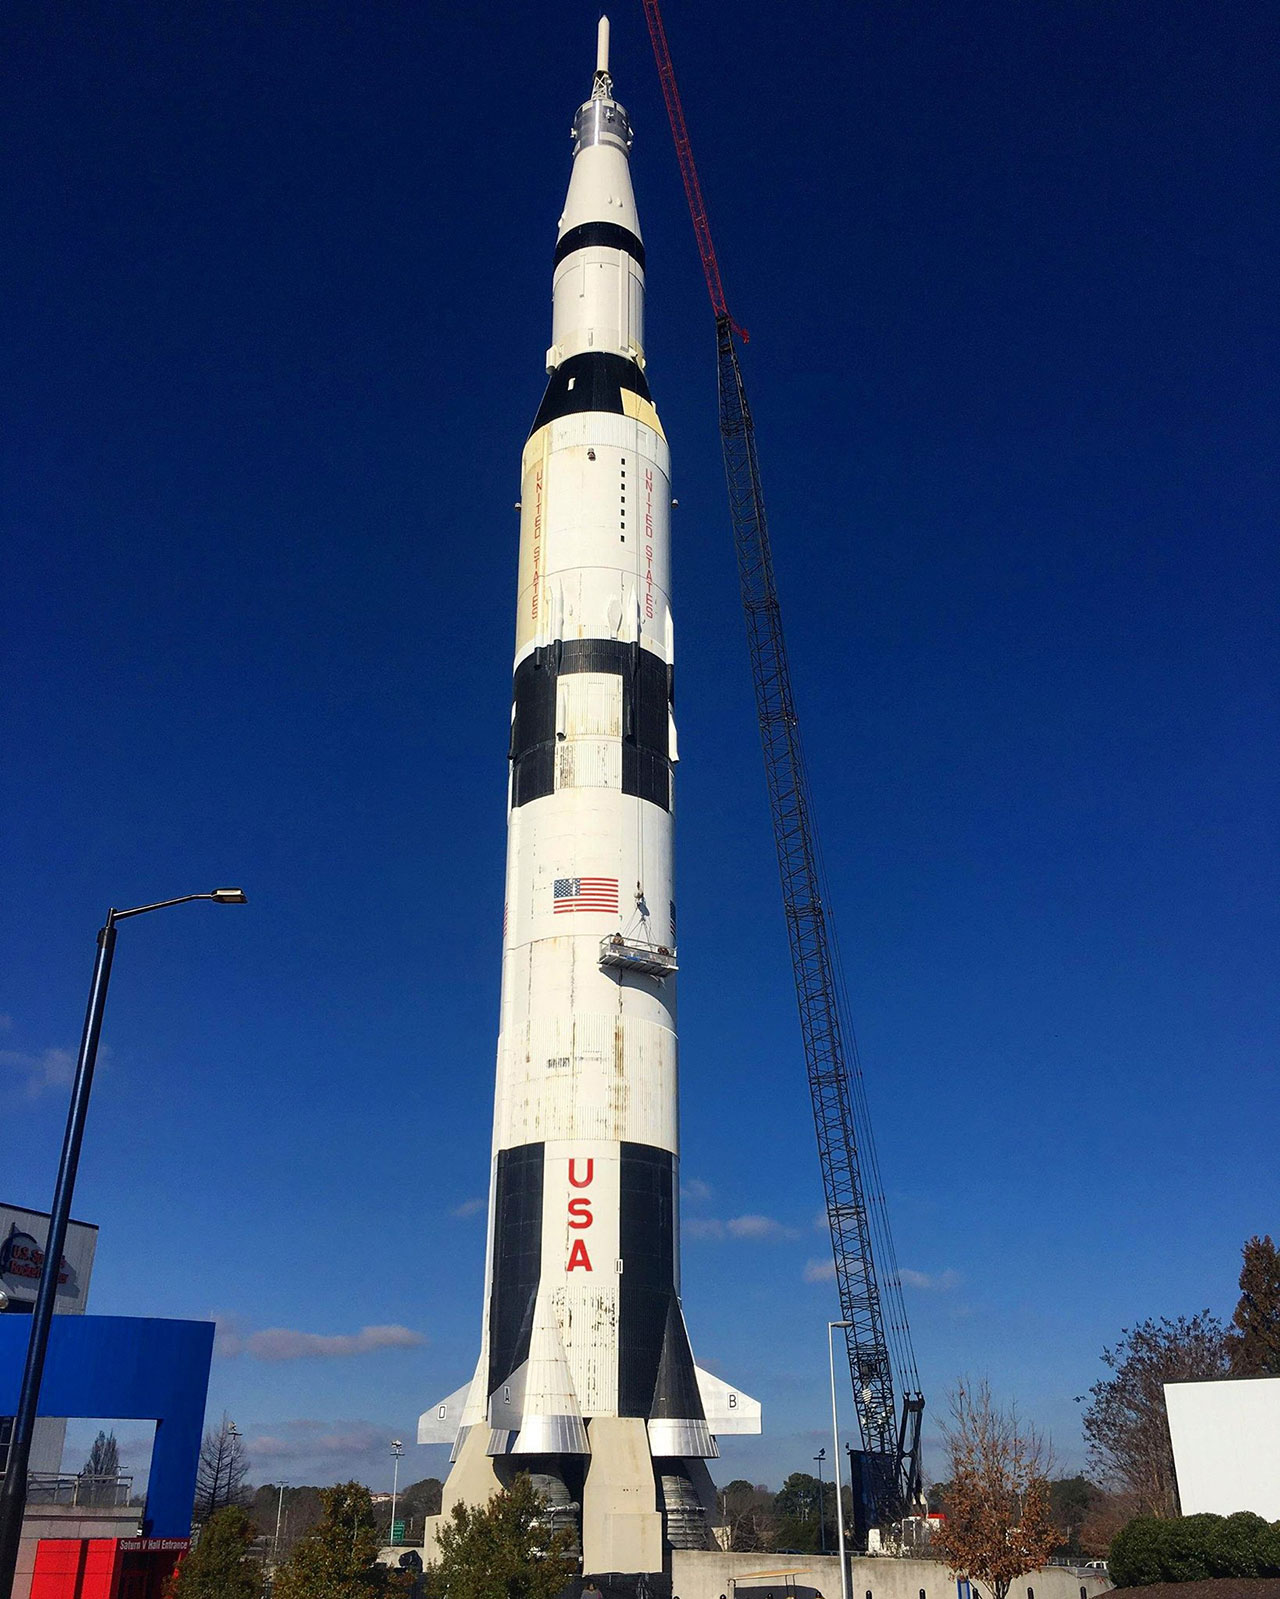 Campaign launched to 'Revive the Saturn V' vertical rocket replica